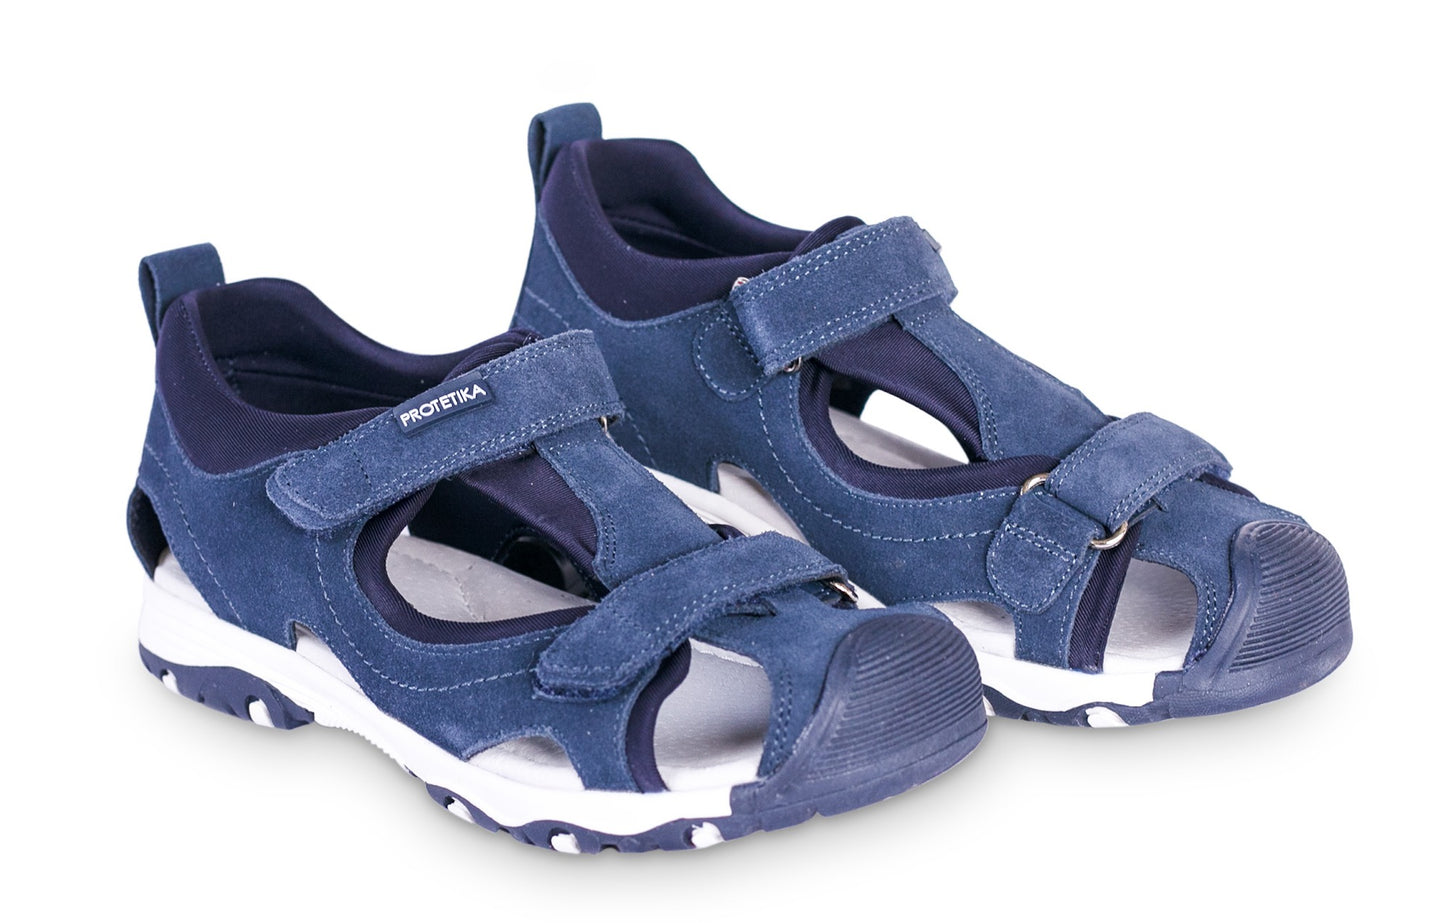 KEDO older boys arch support sandals - feelgoodshoes.ae